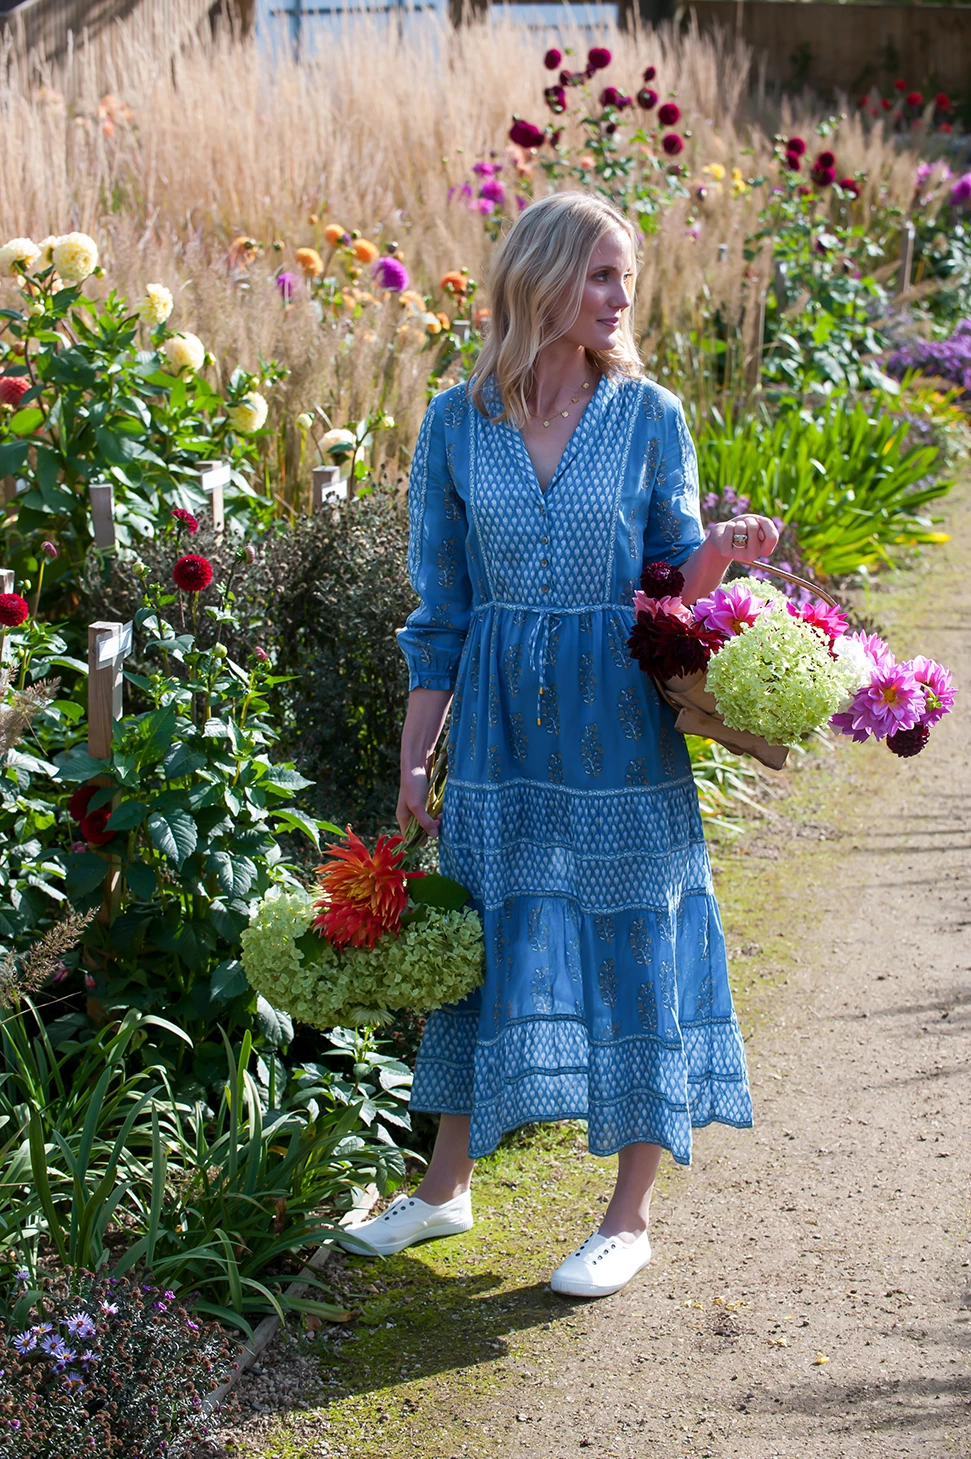 Florist Willow Crossley On Creating A Lifestyle Brand